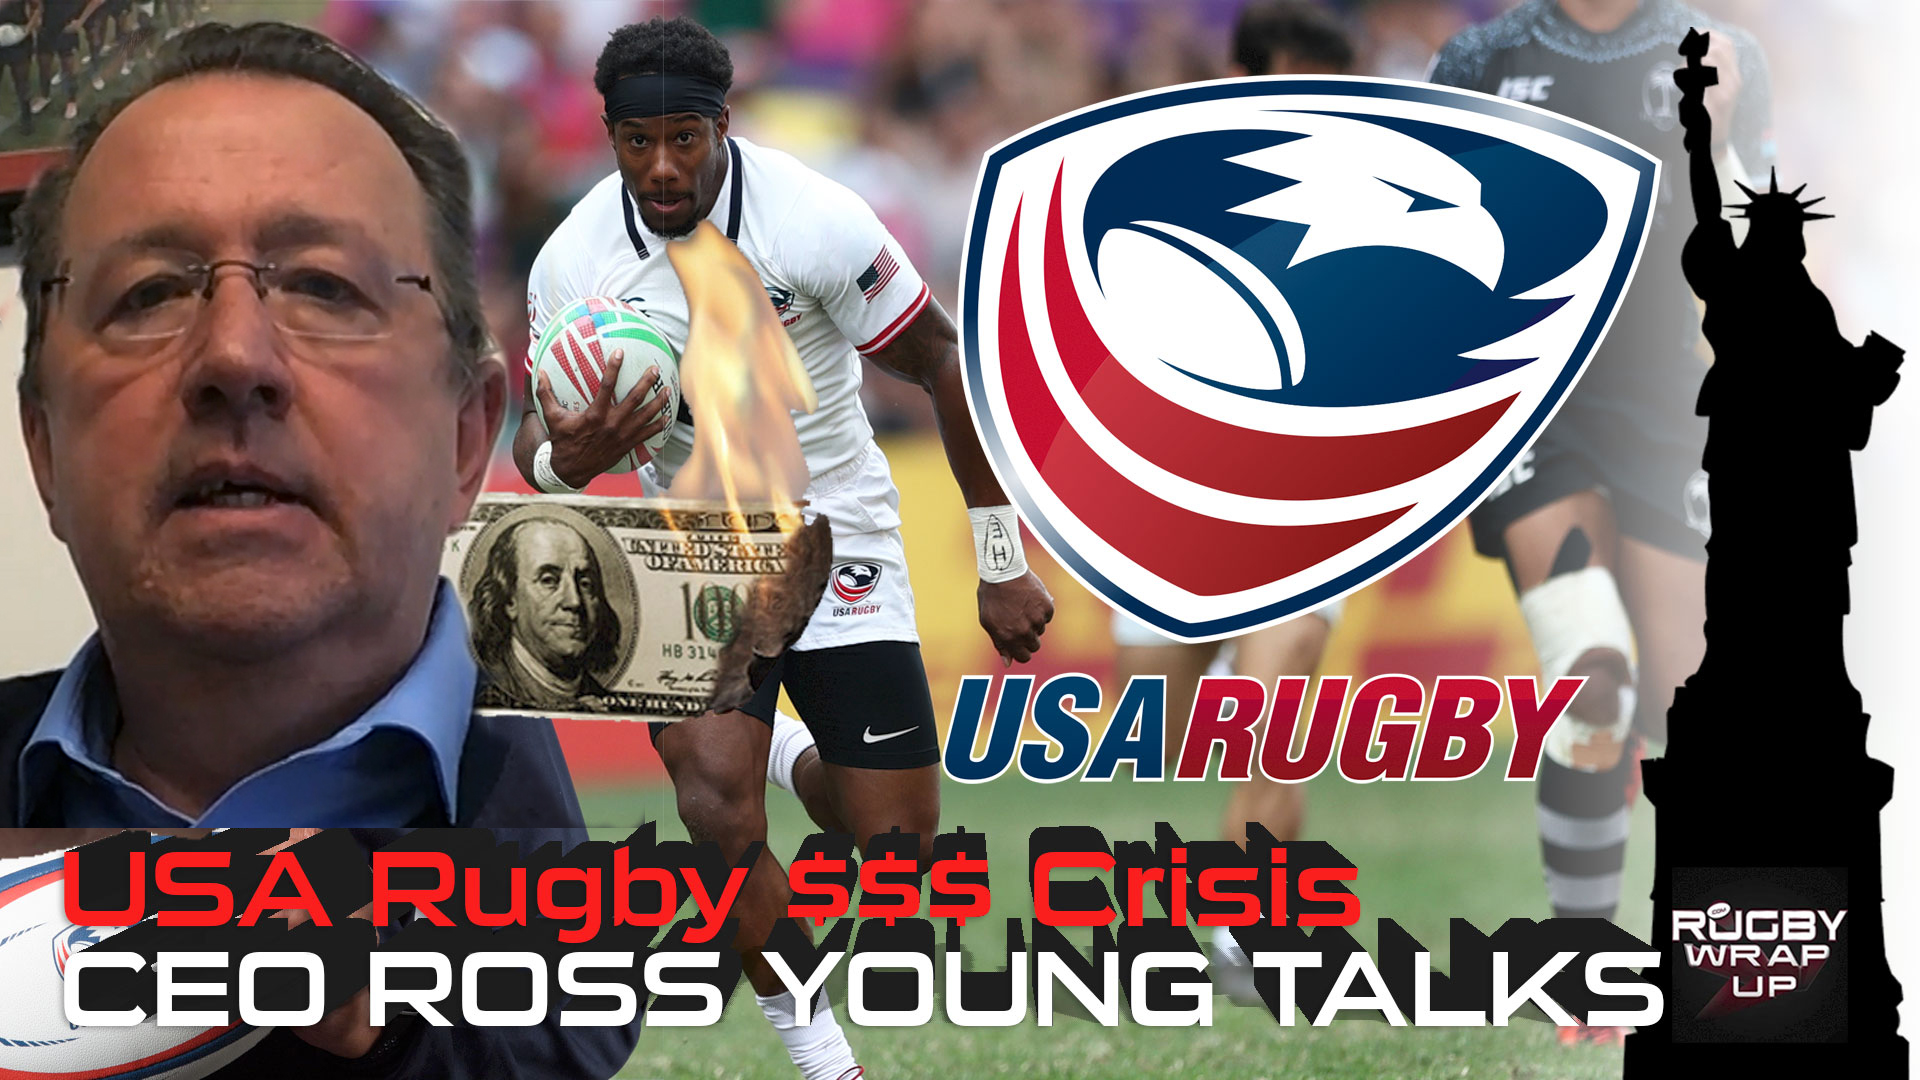 Rugby TV and Podcast: USA Rugby CEO Ross Young Answers Tough Questions re Latest USA Rugby Financial Crisis